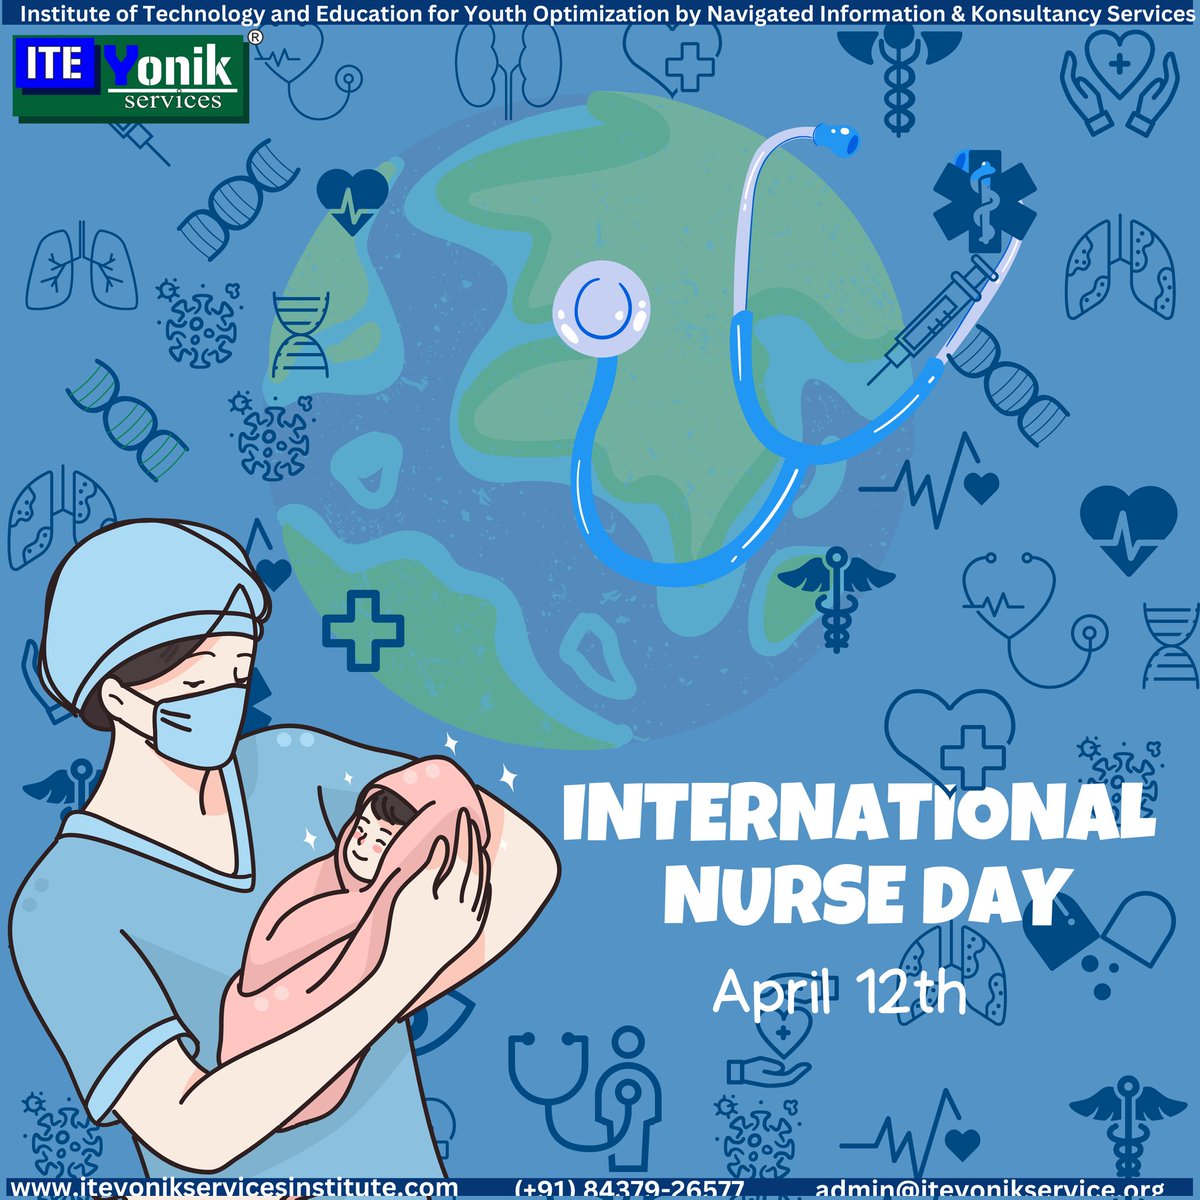 Celebrate nurses’ day to thank them, for in adversity, with us they stay
#nurse 
#internationalnursesday 
#techincaltraining #nontechnicaltraining contact @iteyoniks_training_internships  #iteyoniks #technicalskills #nontechnicalskills #mohali #chandigarh